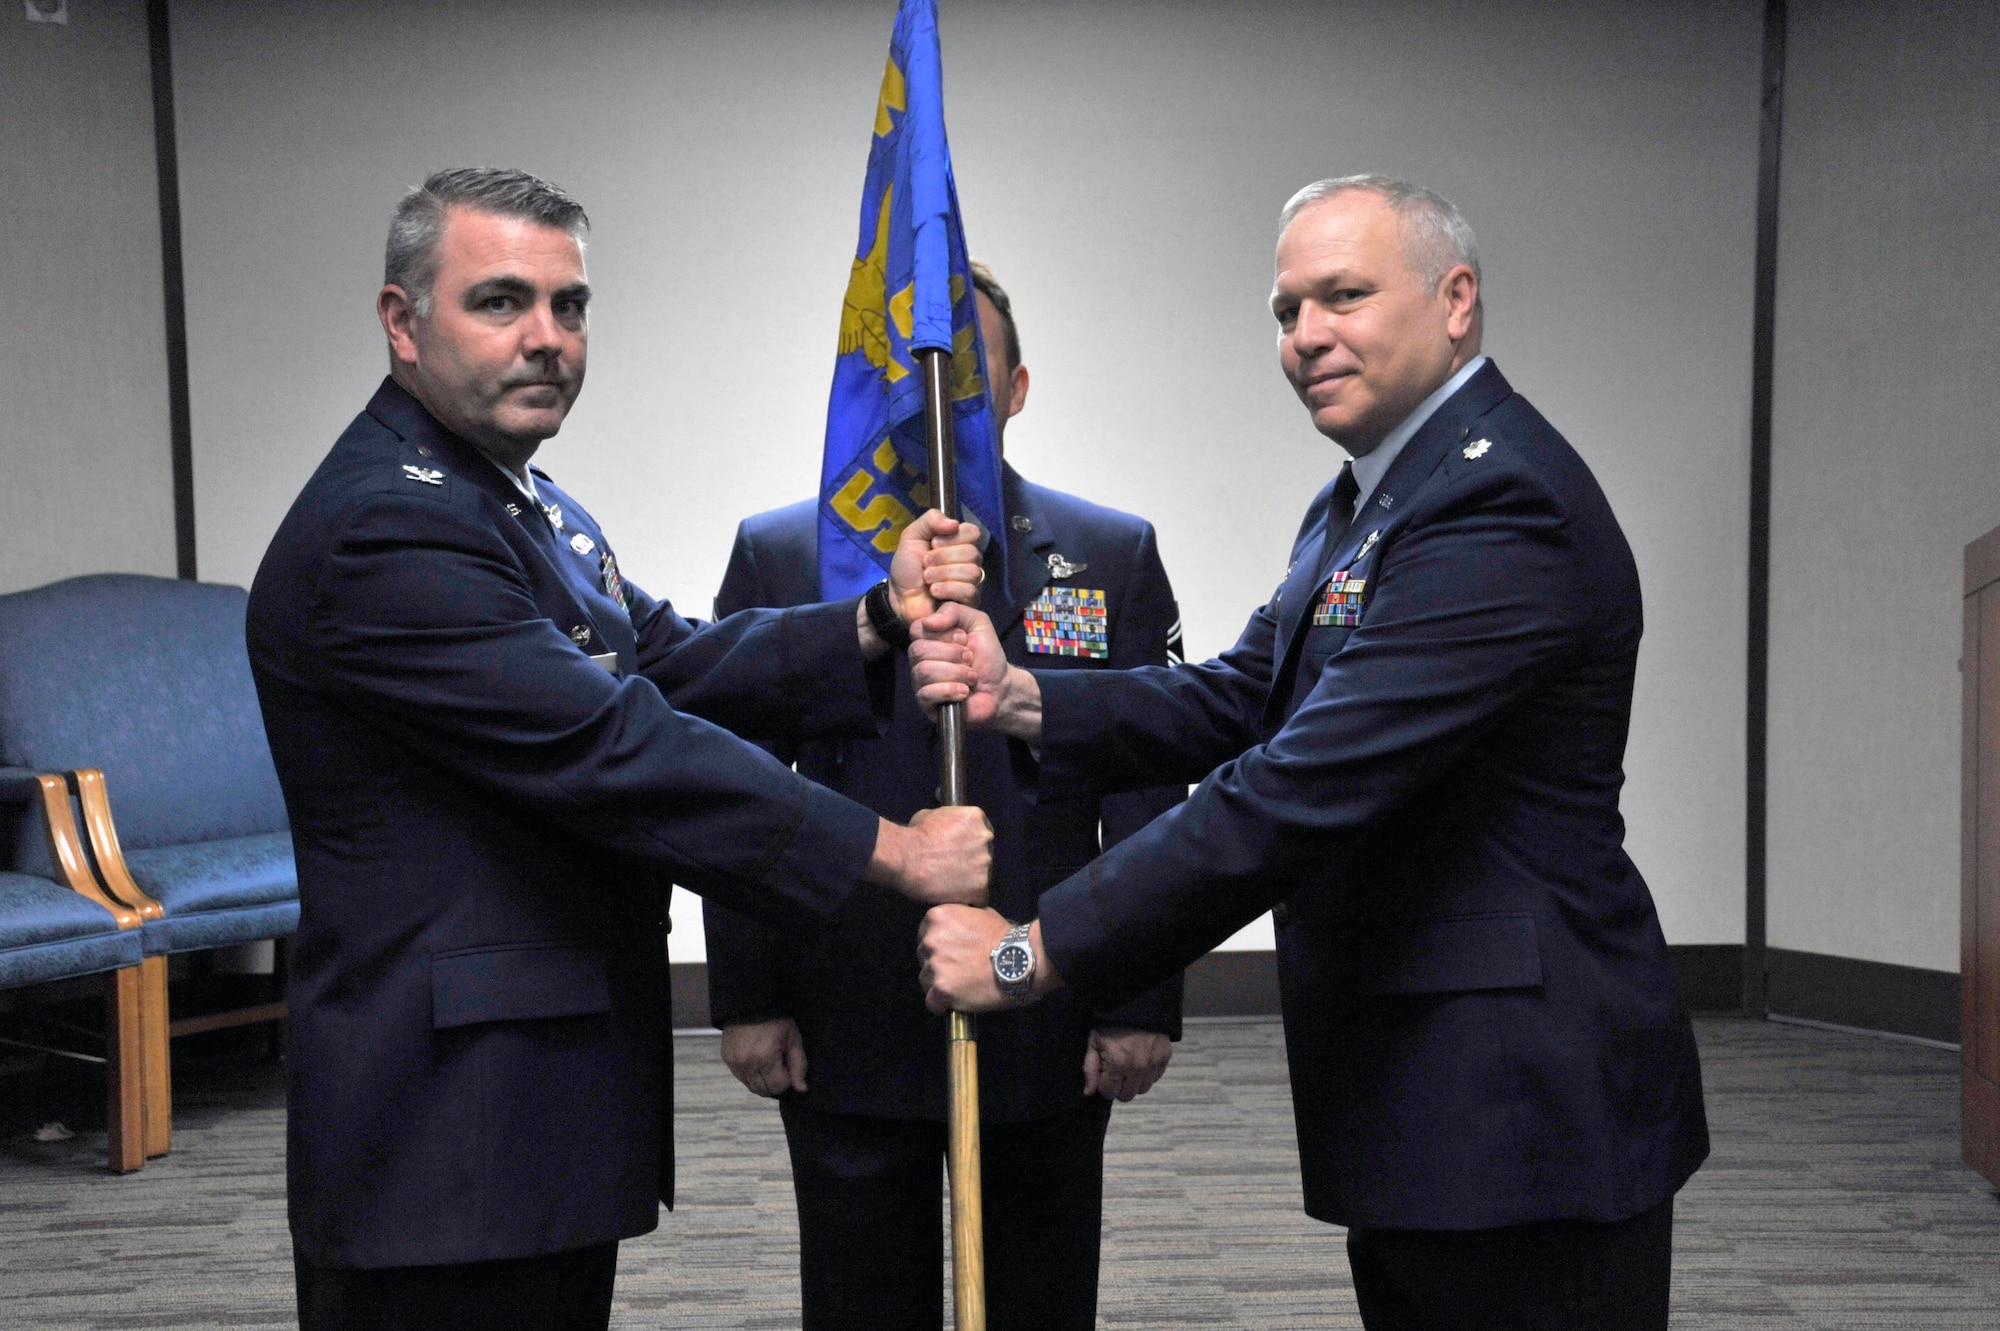 U.S. Air Force Reserve Lt. Col. Dwayne A. Russell (right) accepts command of the 53rd Weather Reconnaissance Squadron from Col. Brian May, 403d Operations Group commander during the 53rd Weather Reconnaissance Squadron change of command ceremony April 6, 2019 at Keesler Air Force Base, Miss. Col. Russell has been with the 53rd WRS since September 1996.  (U.S. Air Force Photo by Tech. Sgt. Sarah Loicano)